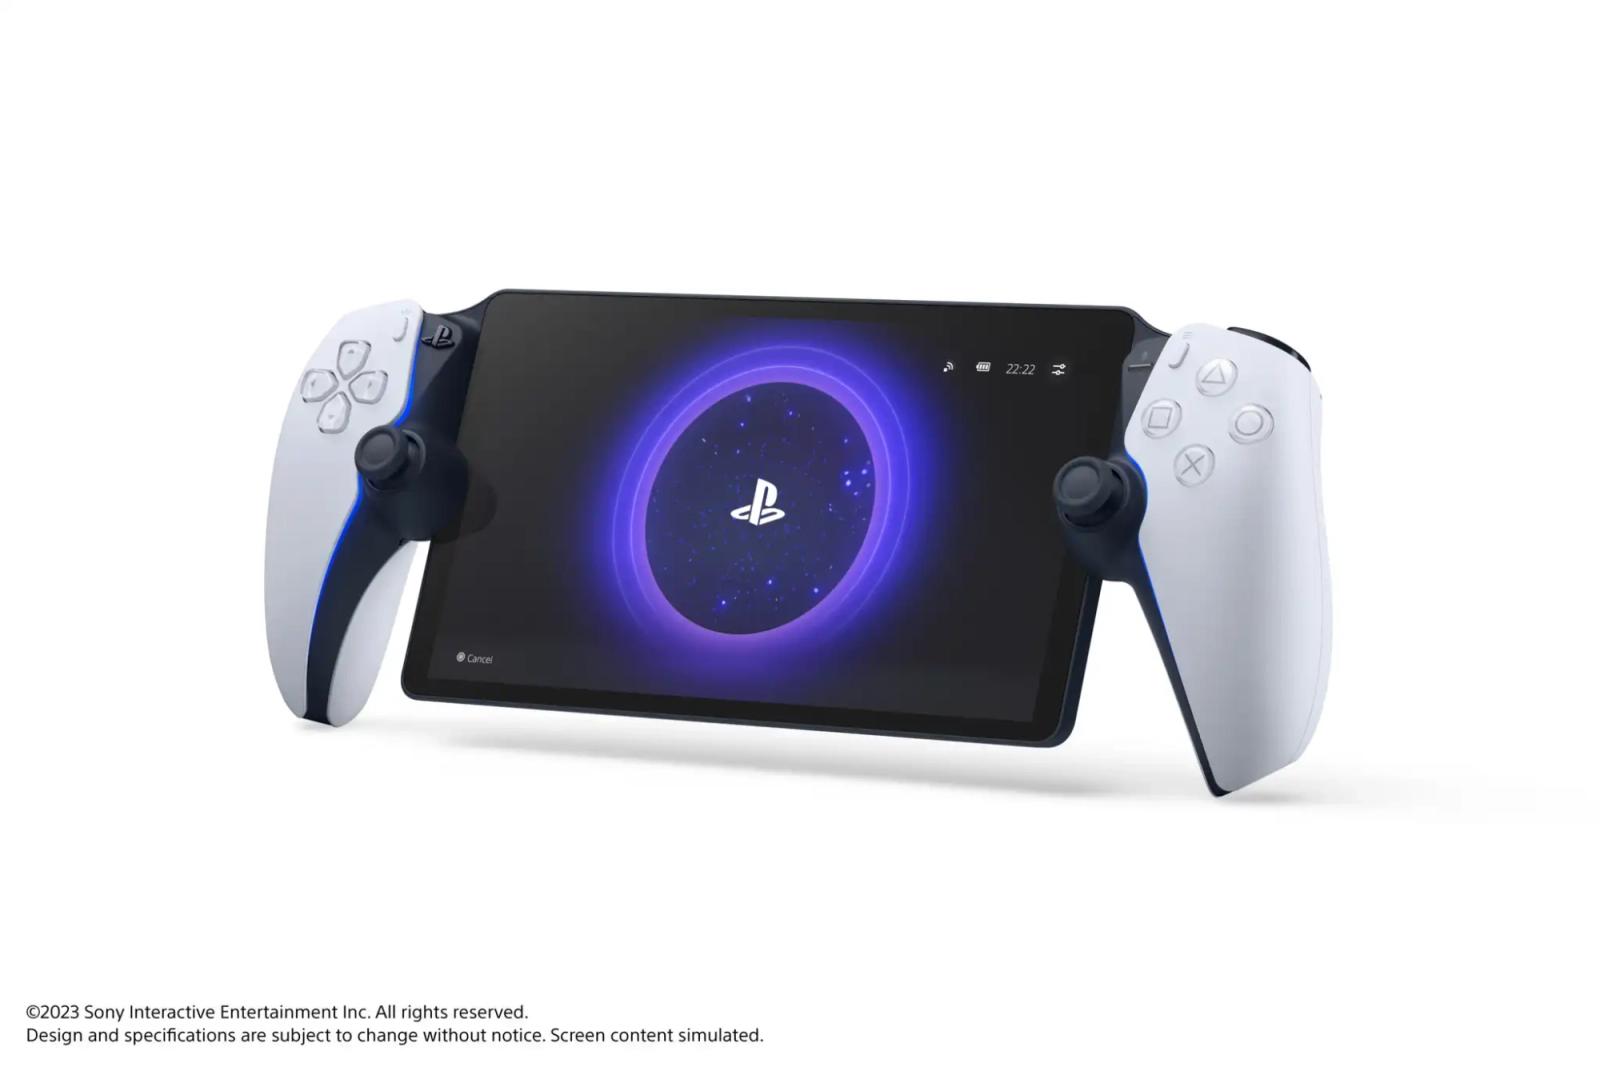 The new sony playstation portal streaming handheld device